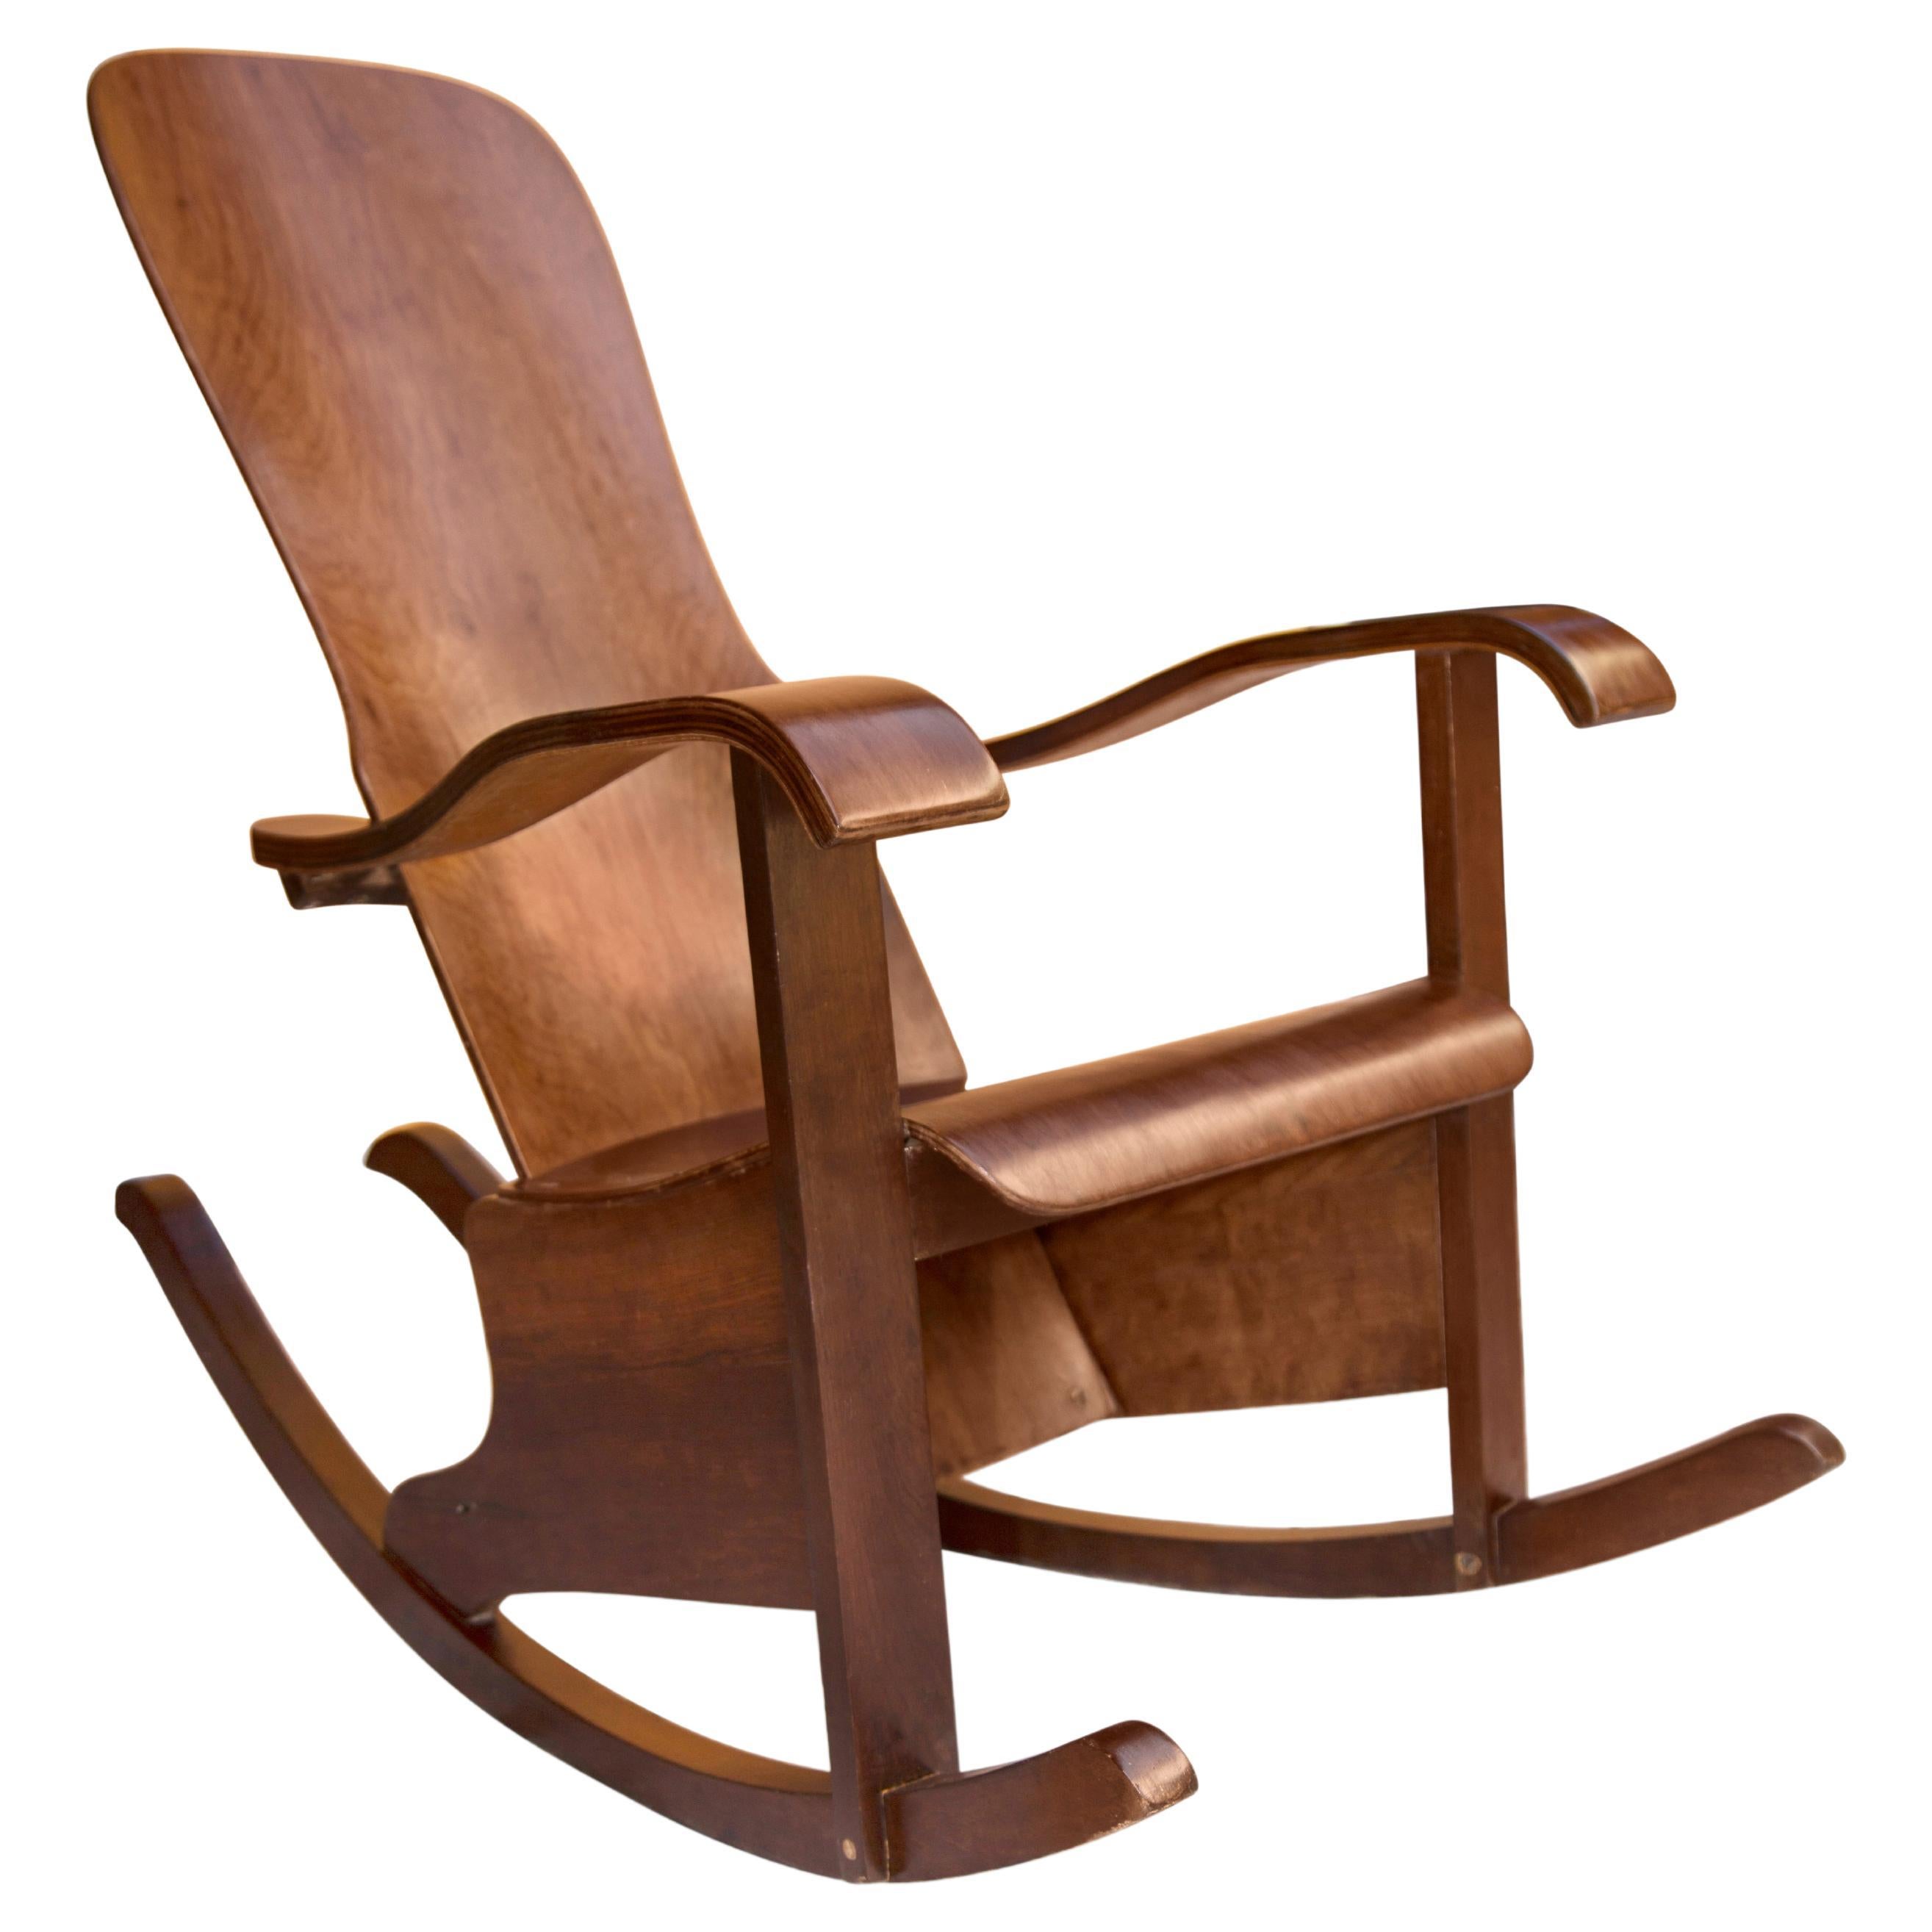 Brazilian Modern Rocking Chair in Bentwood by Moveis Cimo, 1950, Brazil